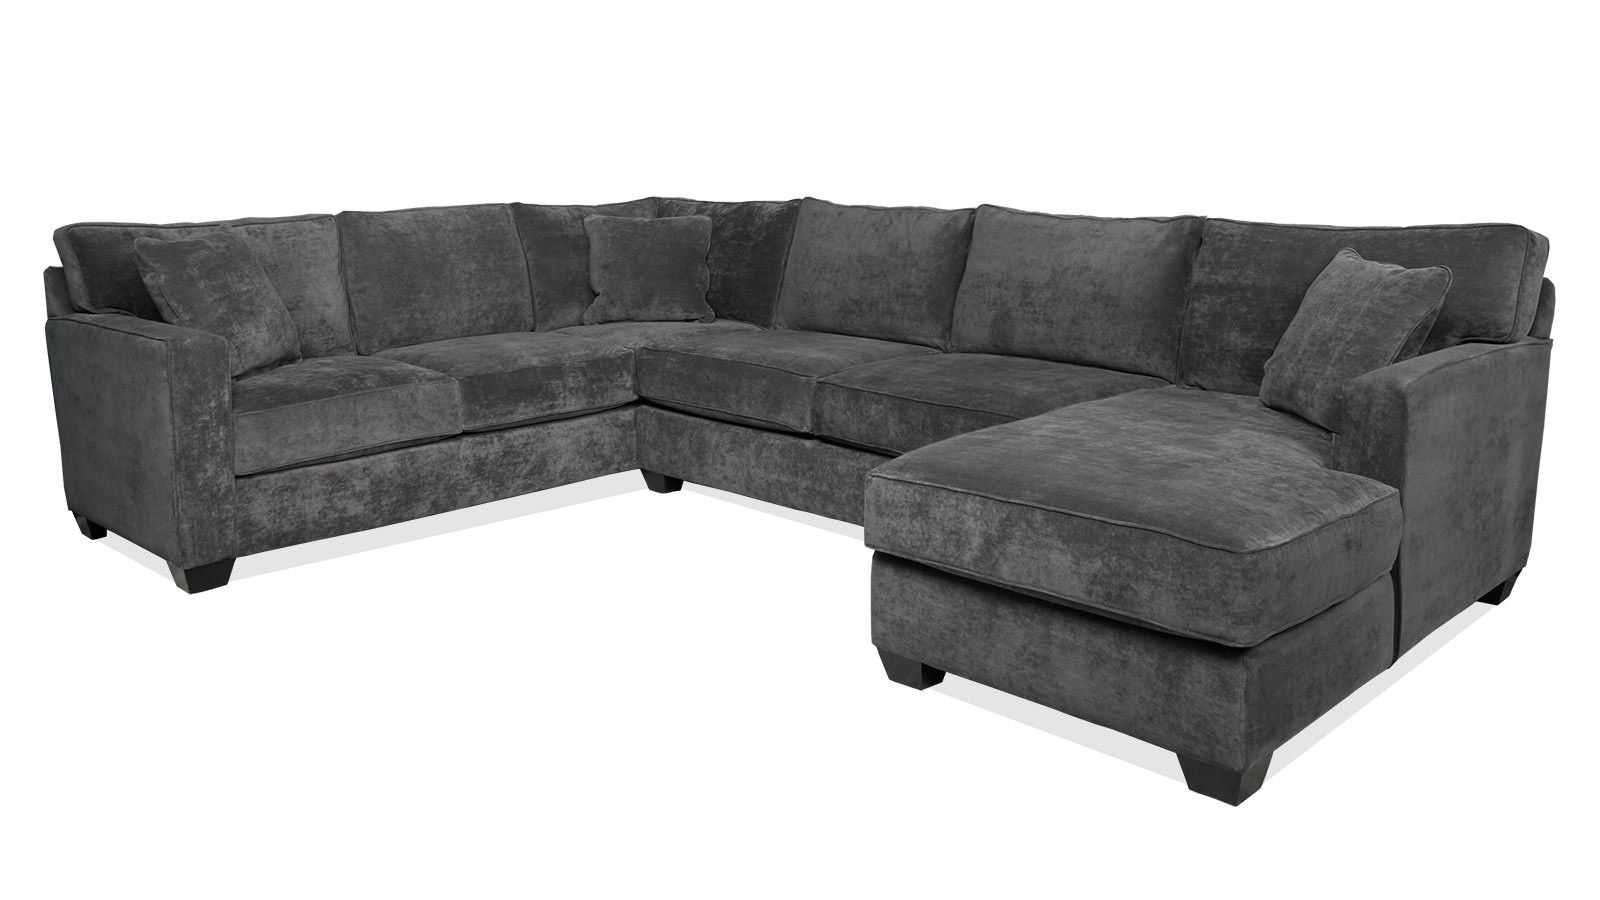 New Berlin Raf Sectional | Gallery Furniture Within Gallery Furniture Sectional Sofas (Photo 1 of 10)